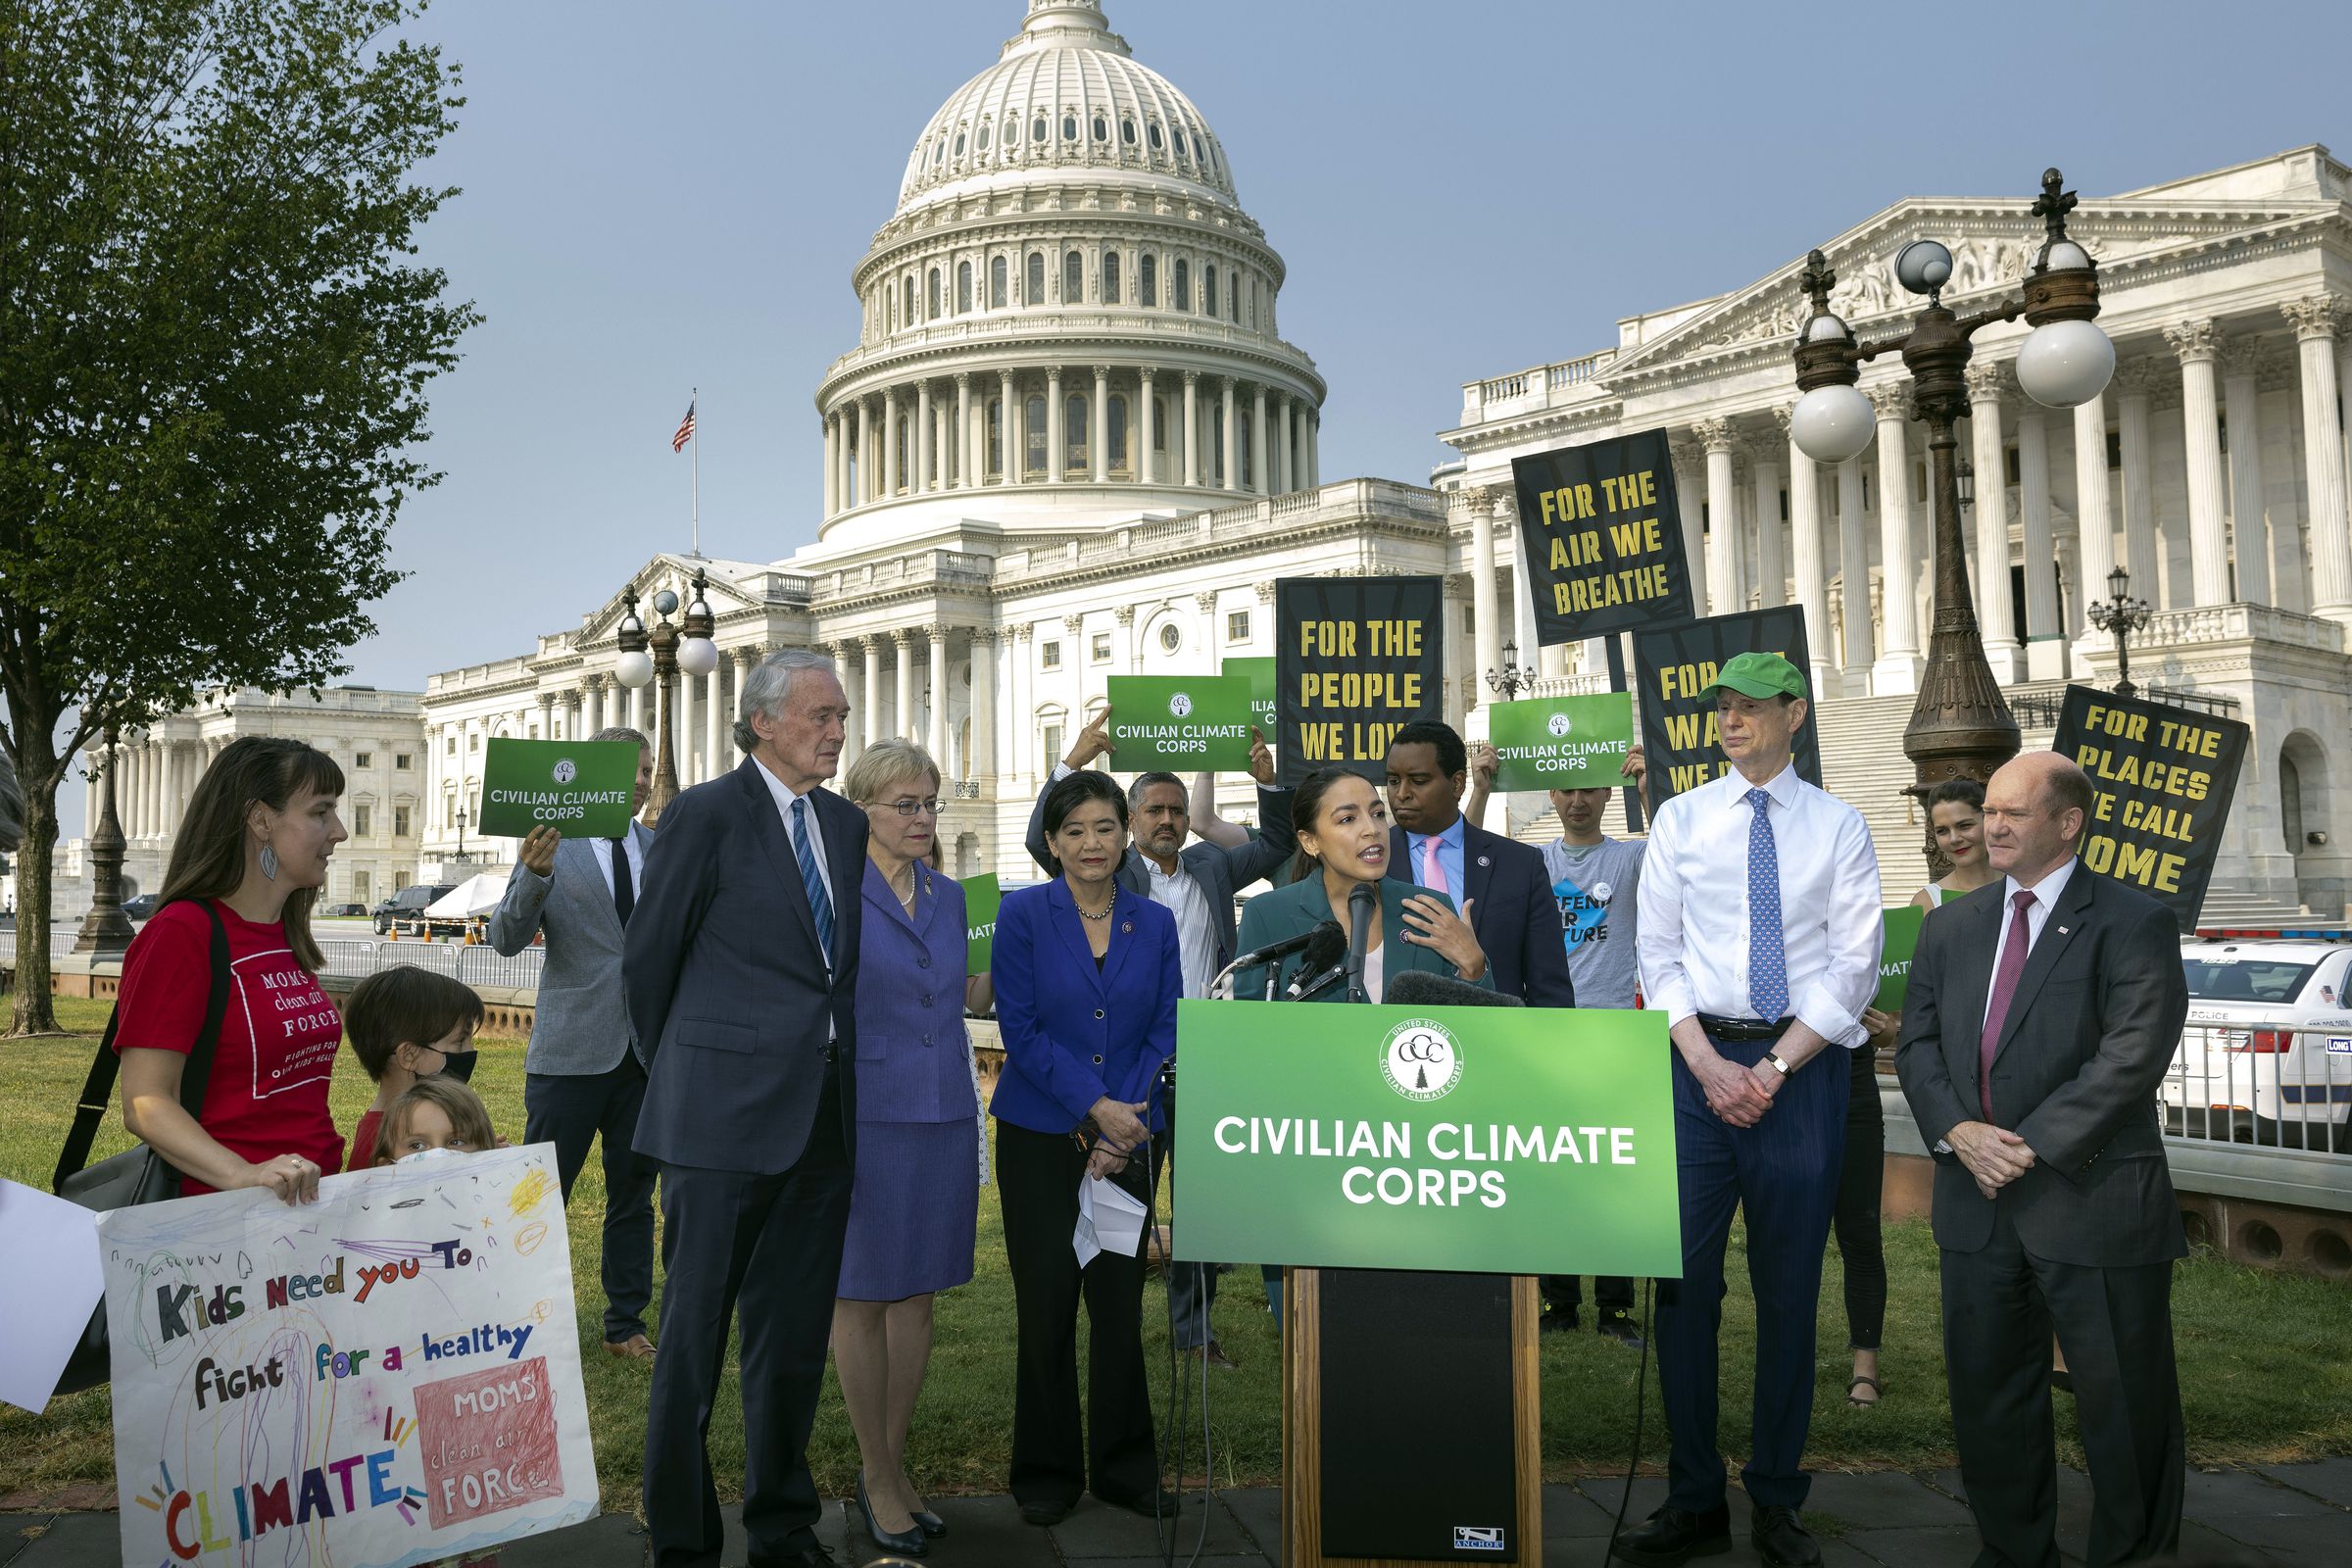 Bicameral Democrats Call For Civilian Climate Corps To Be Included In Reconciliation Process